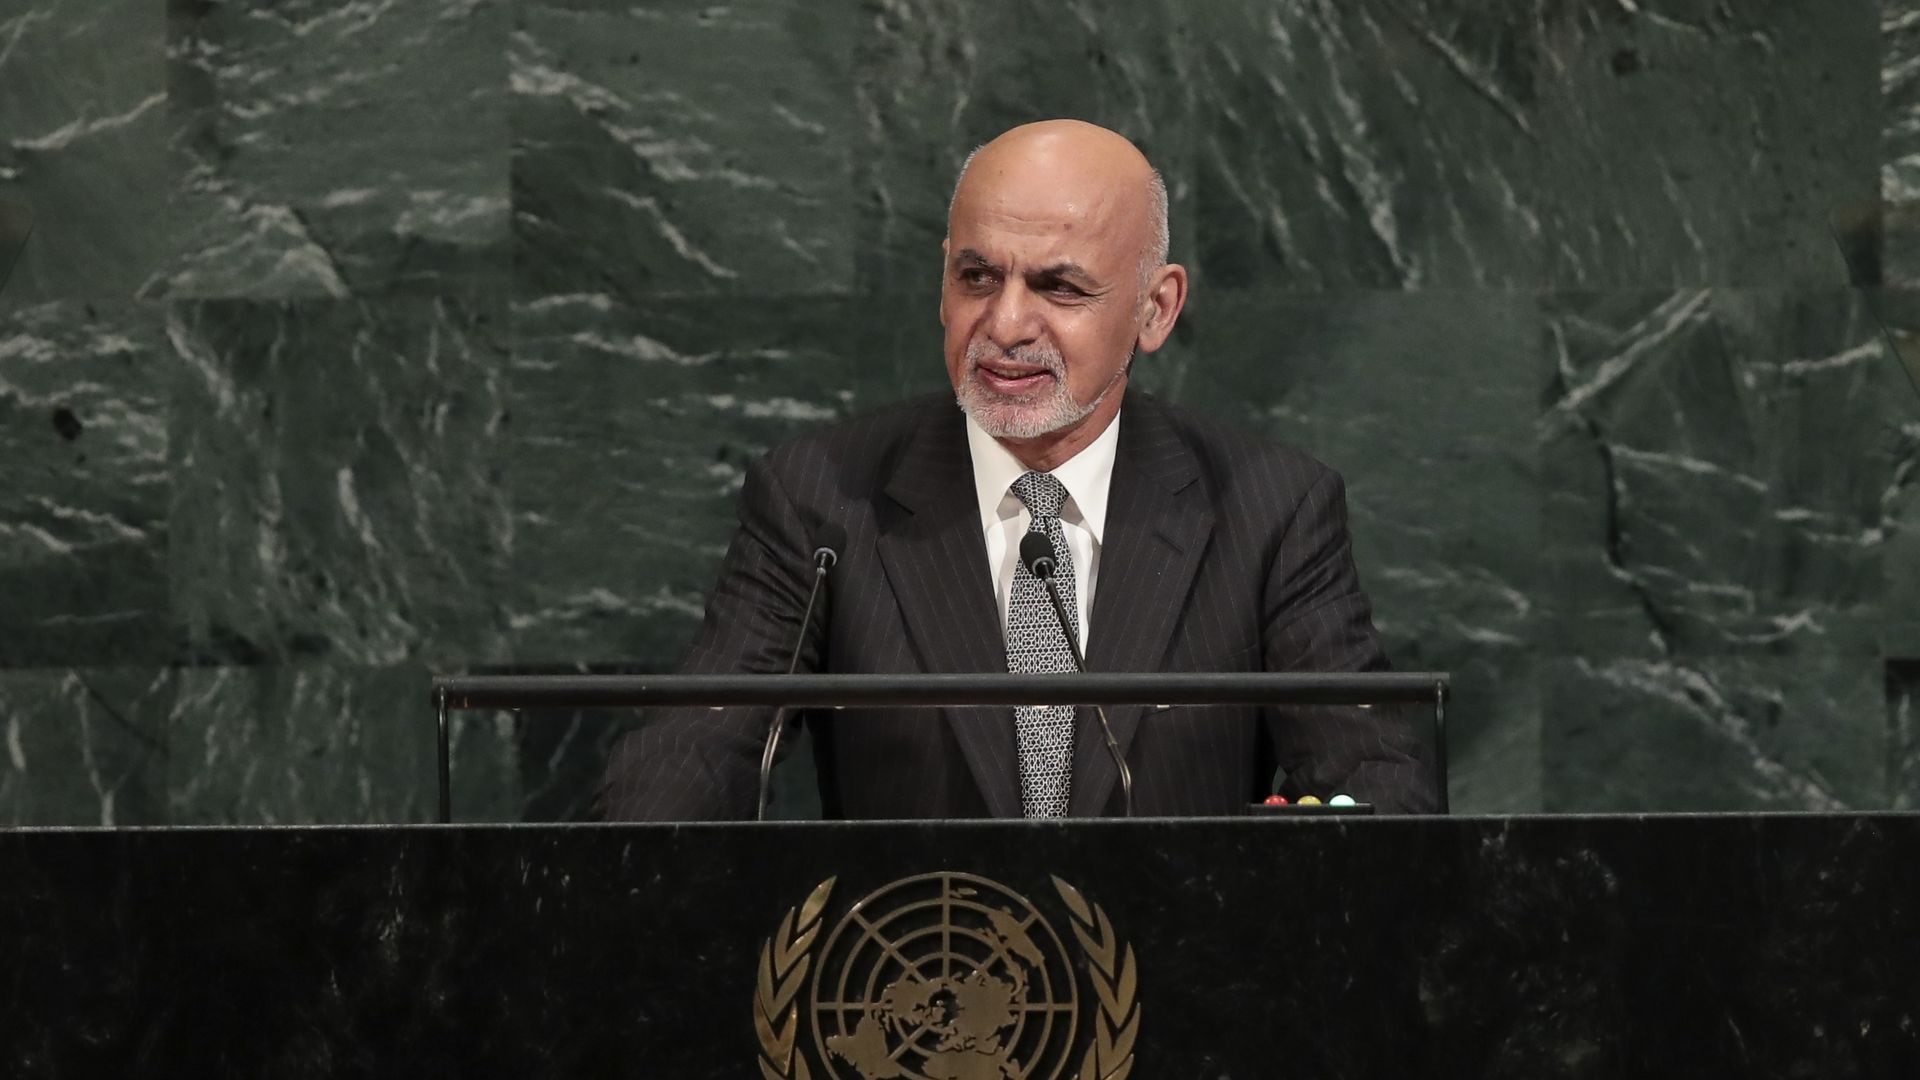 Ashraf Ghani, president of Afghanistan, addresses the United Nations General Assembly at UN headquarters